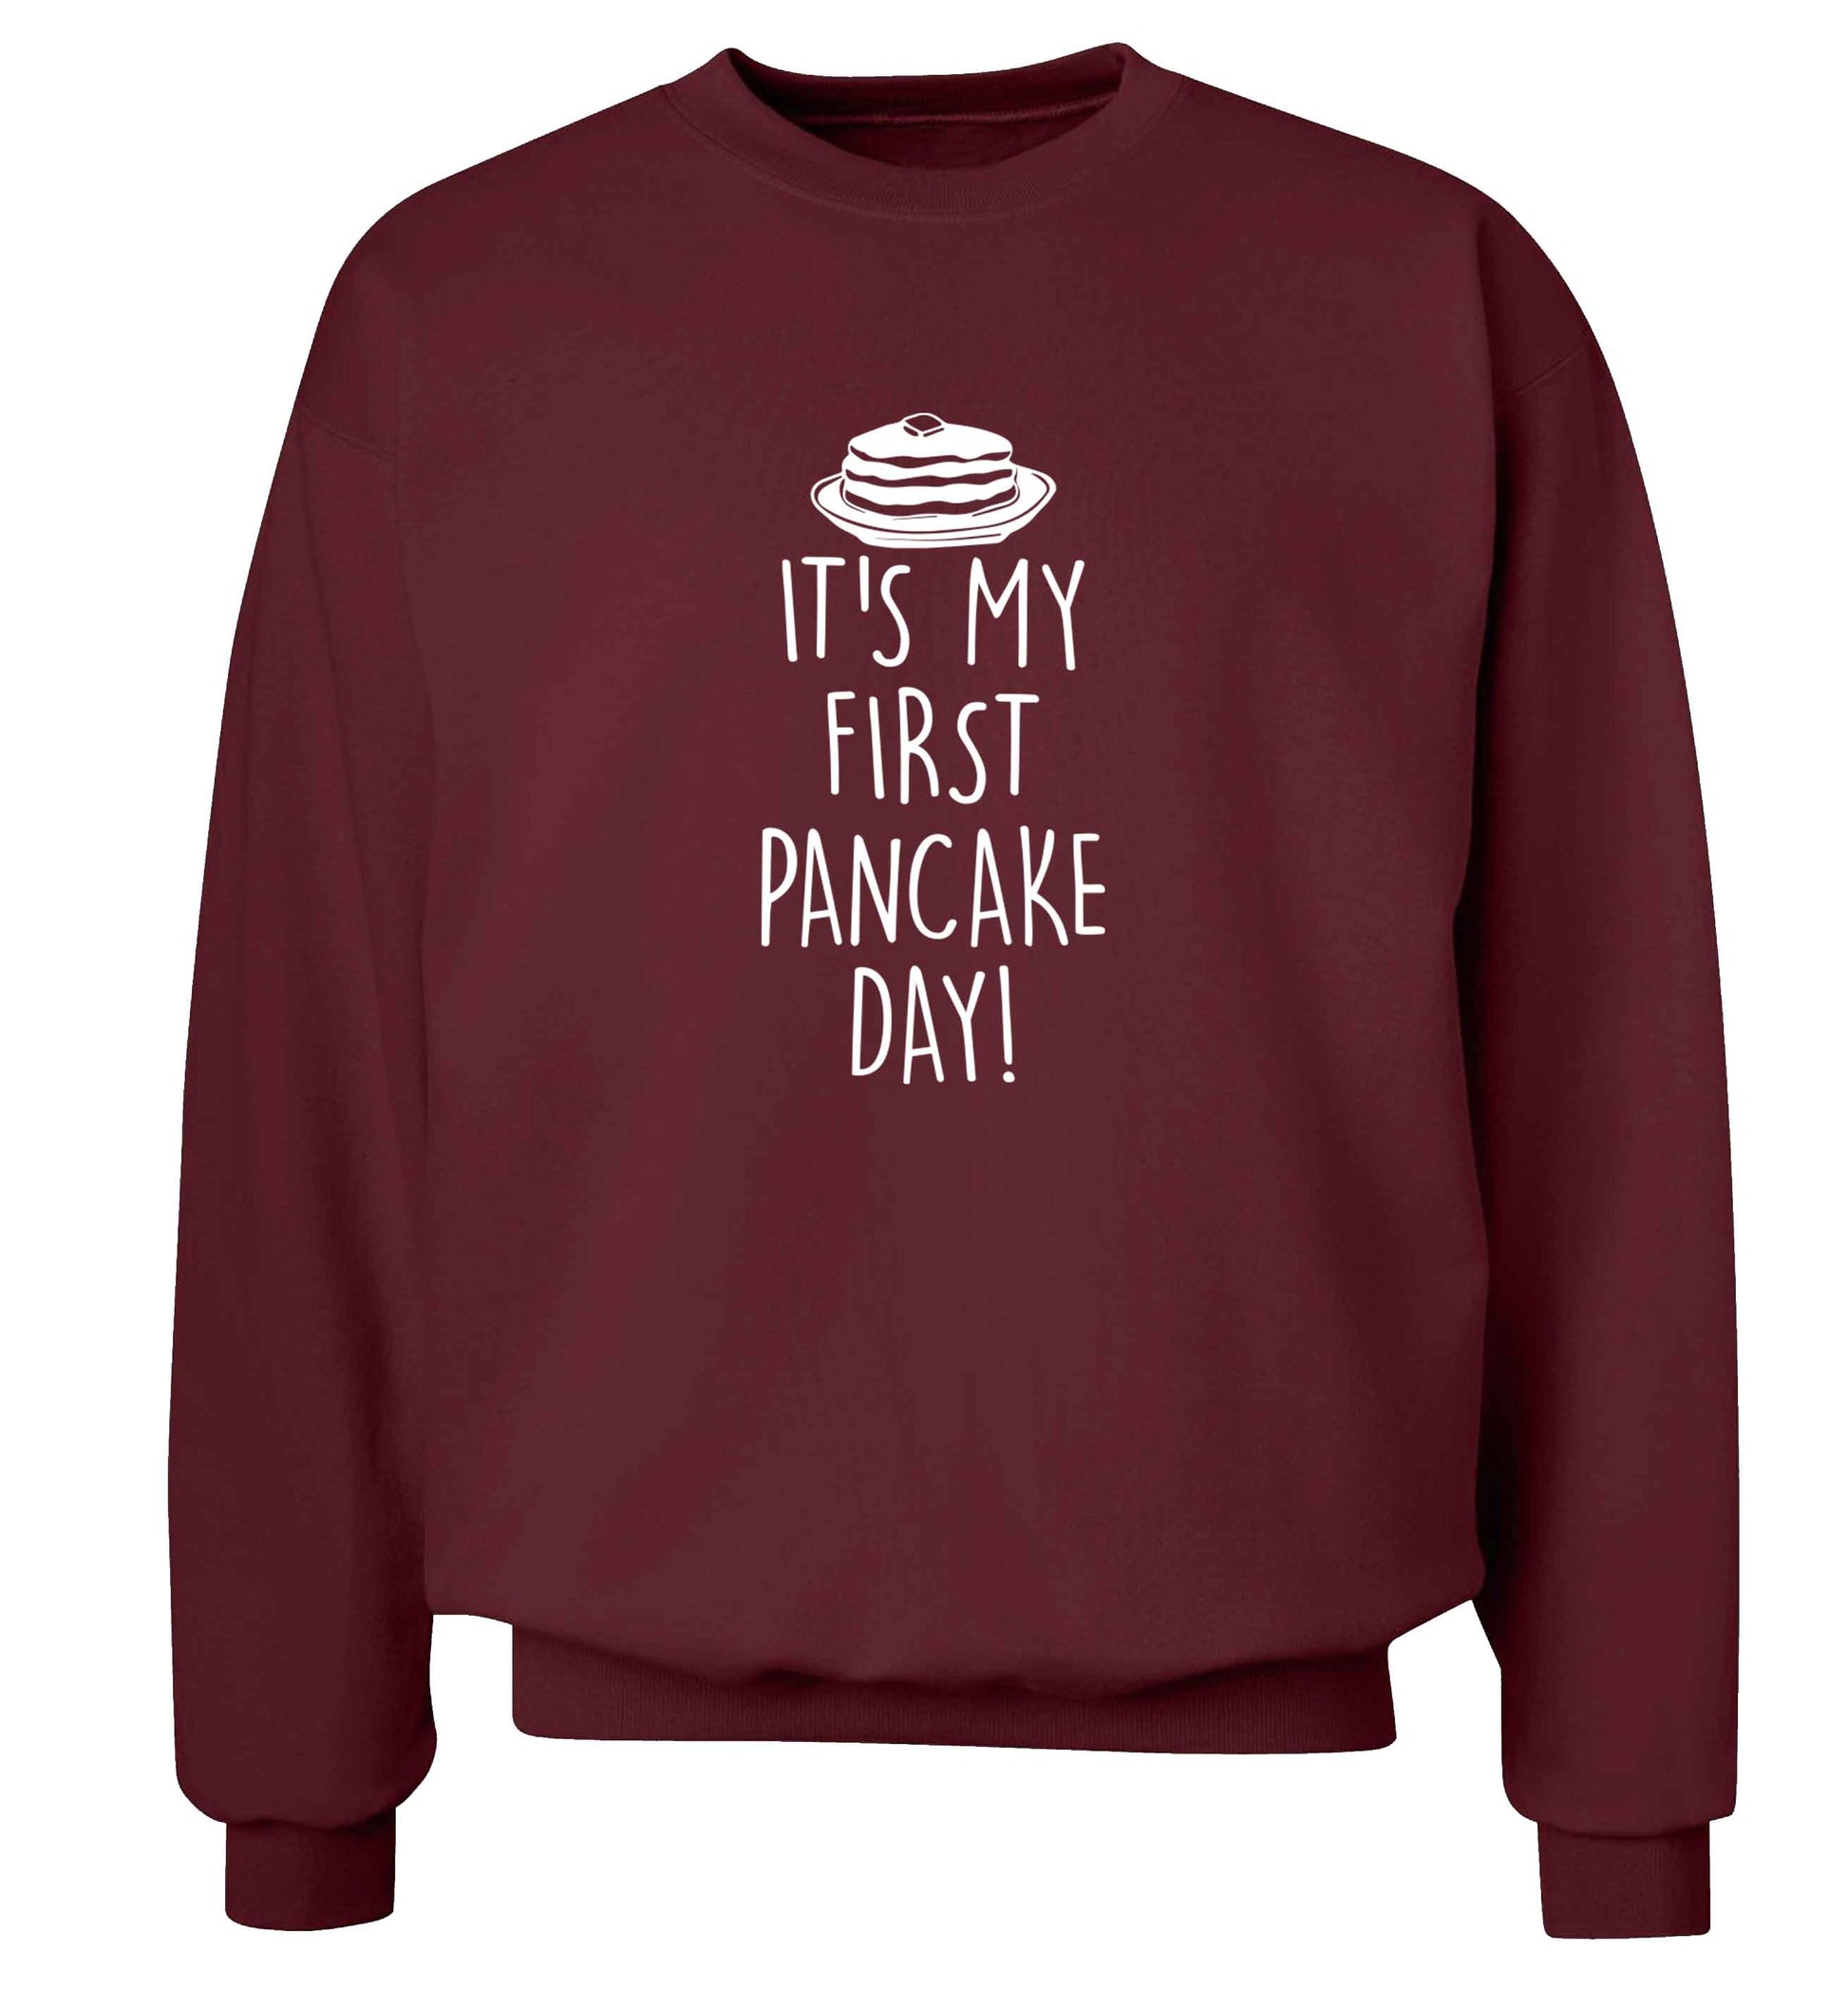 It's my first pancake day adult's unisex maroon sweater 2XL